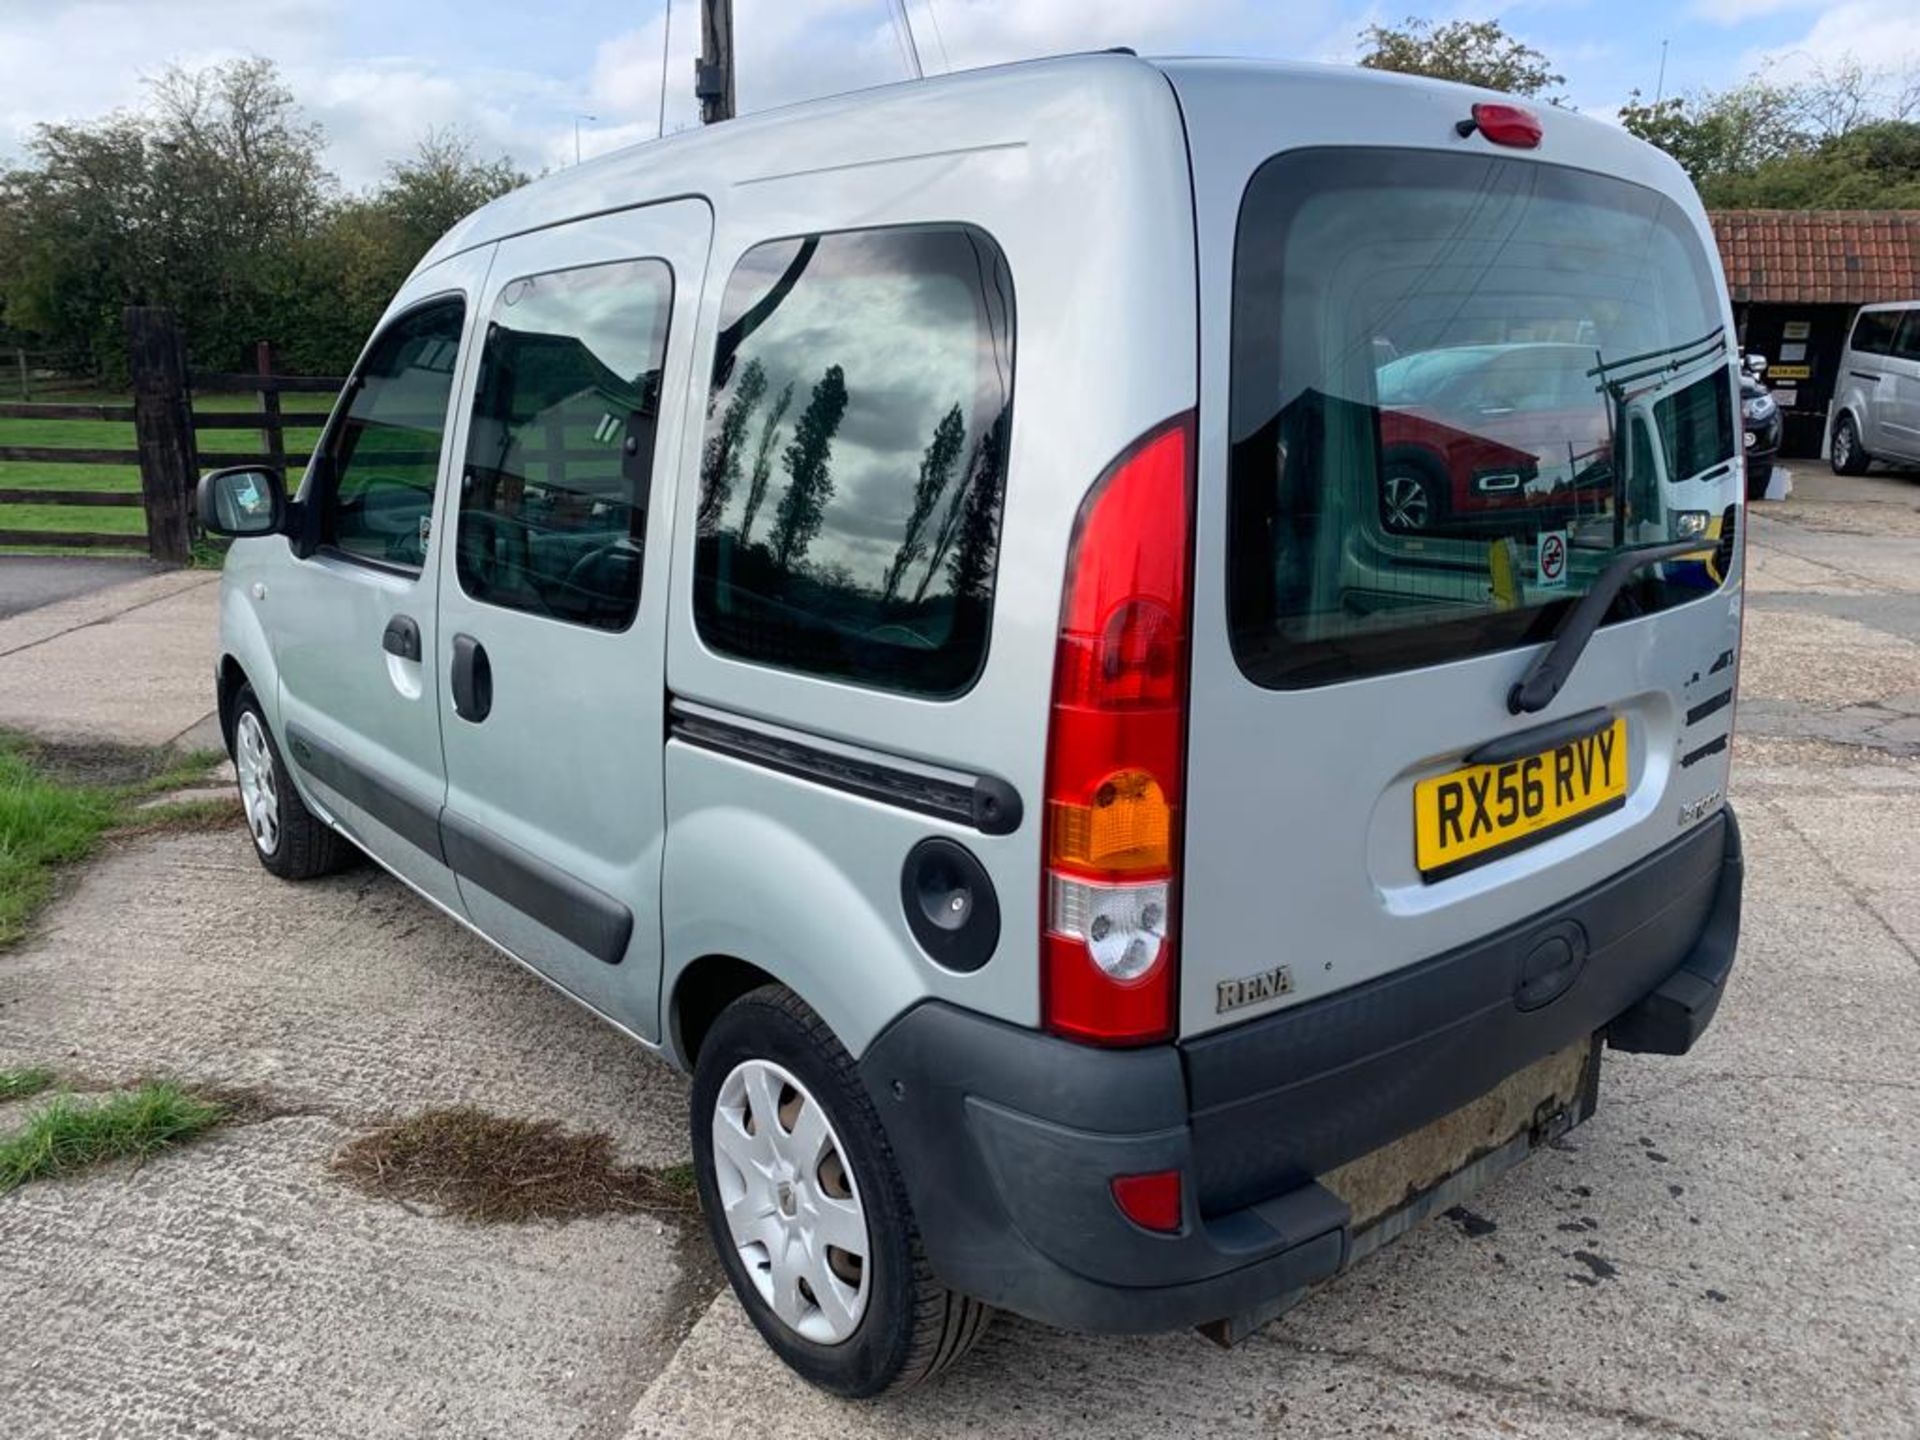 Renault Kangoo Authentique panel van, registration number RX56RVY, first registered 27/02/2007 with - Image 3 of 13